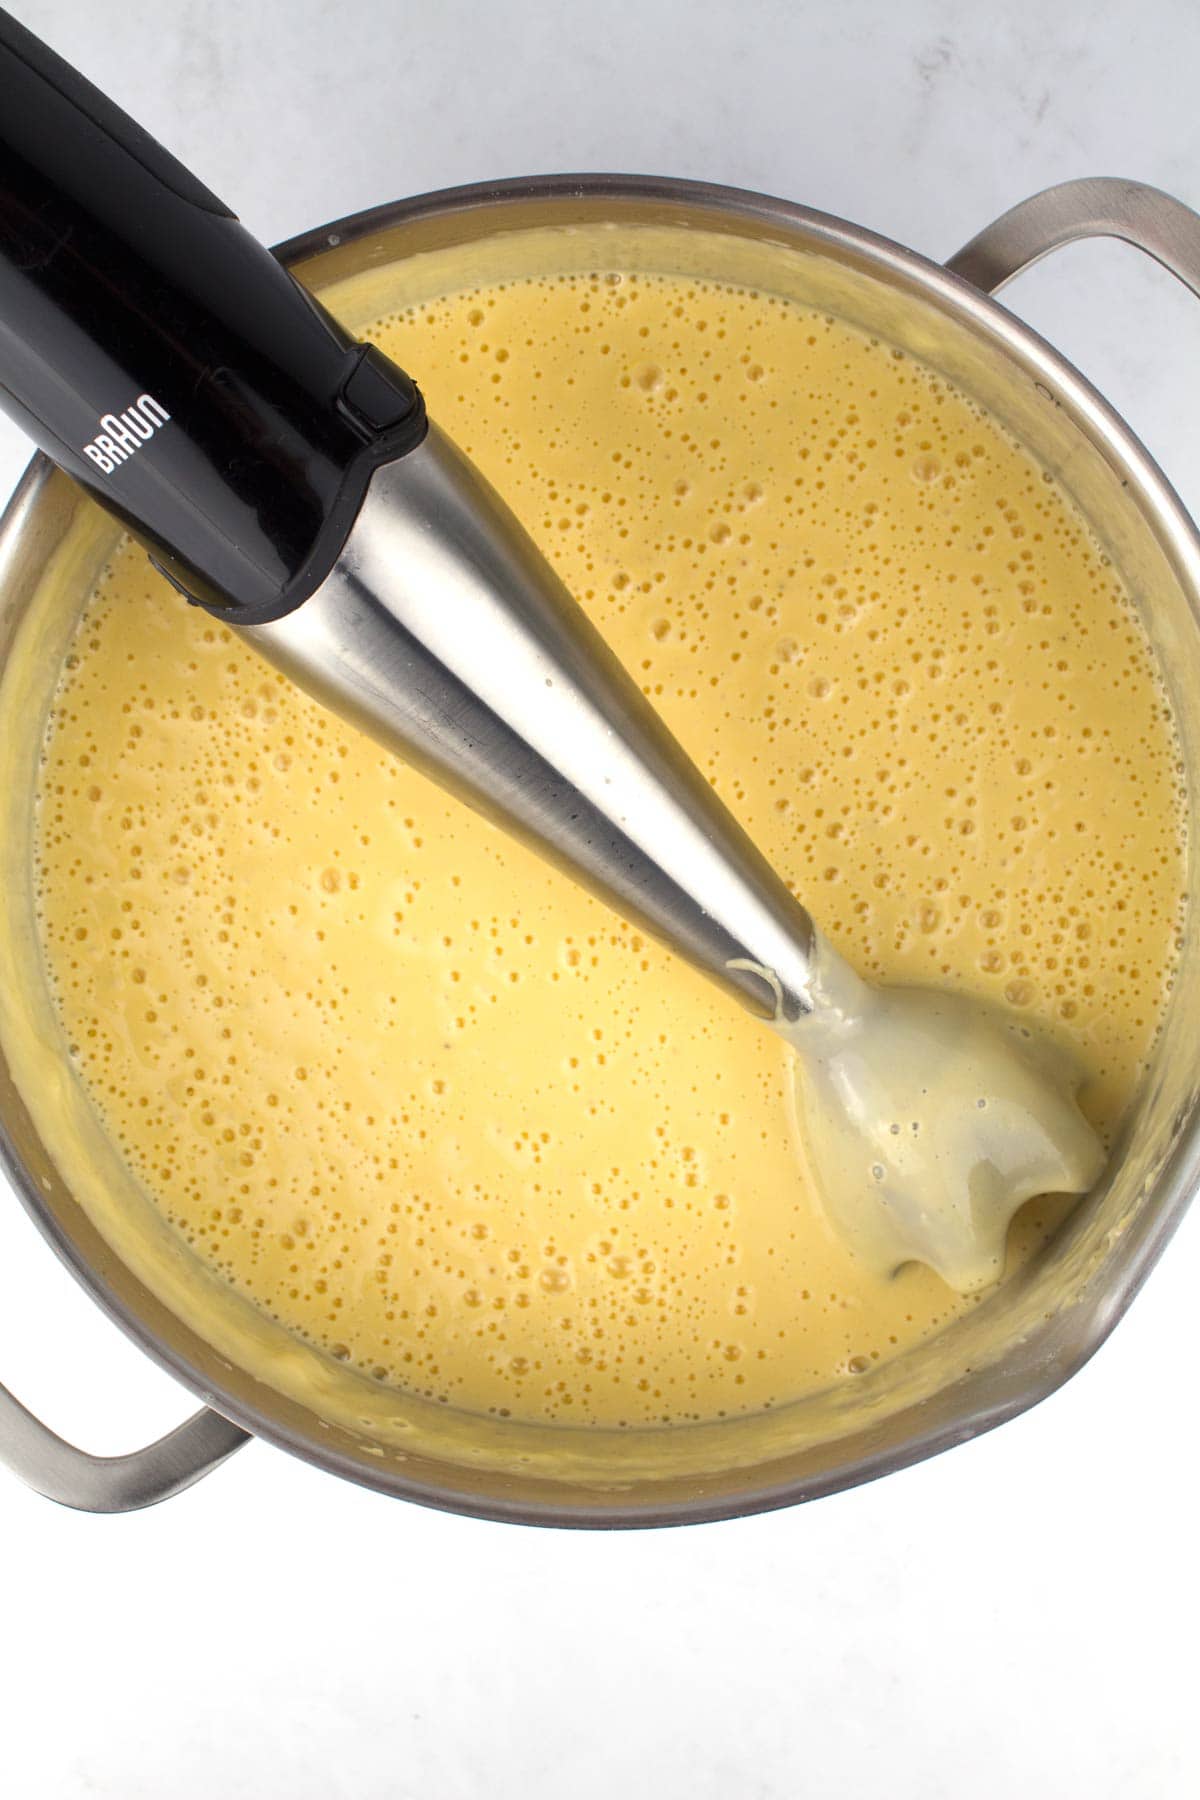 Immersion blender in ultra-creamy mac and cheese sauce.